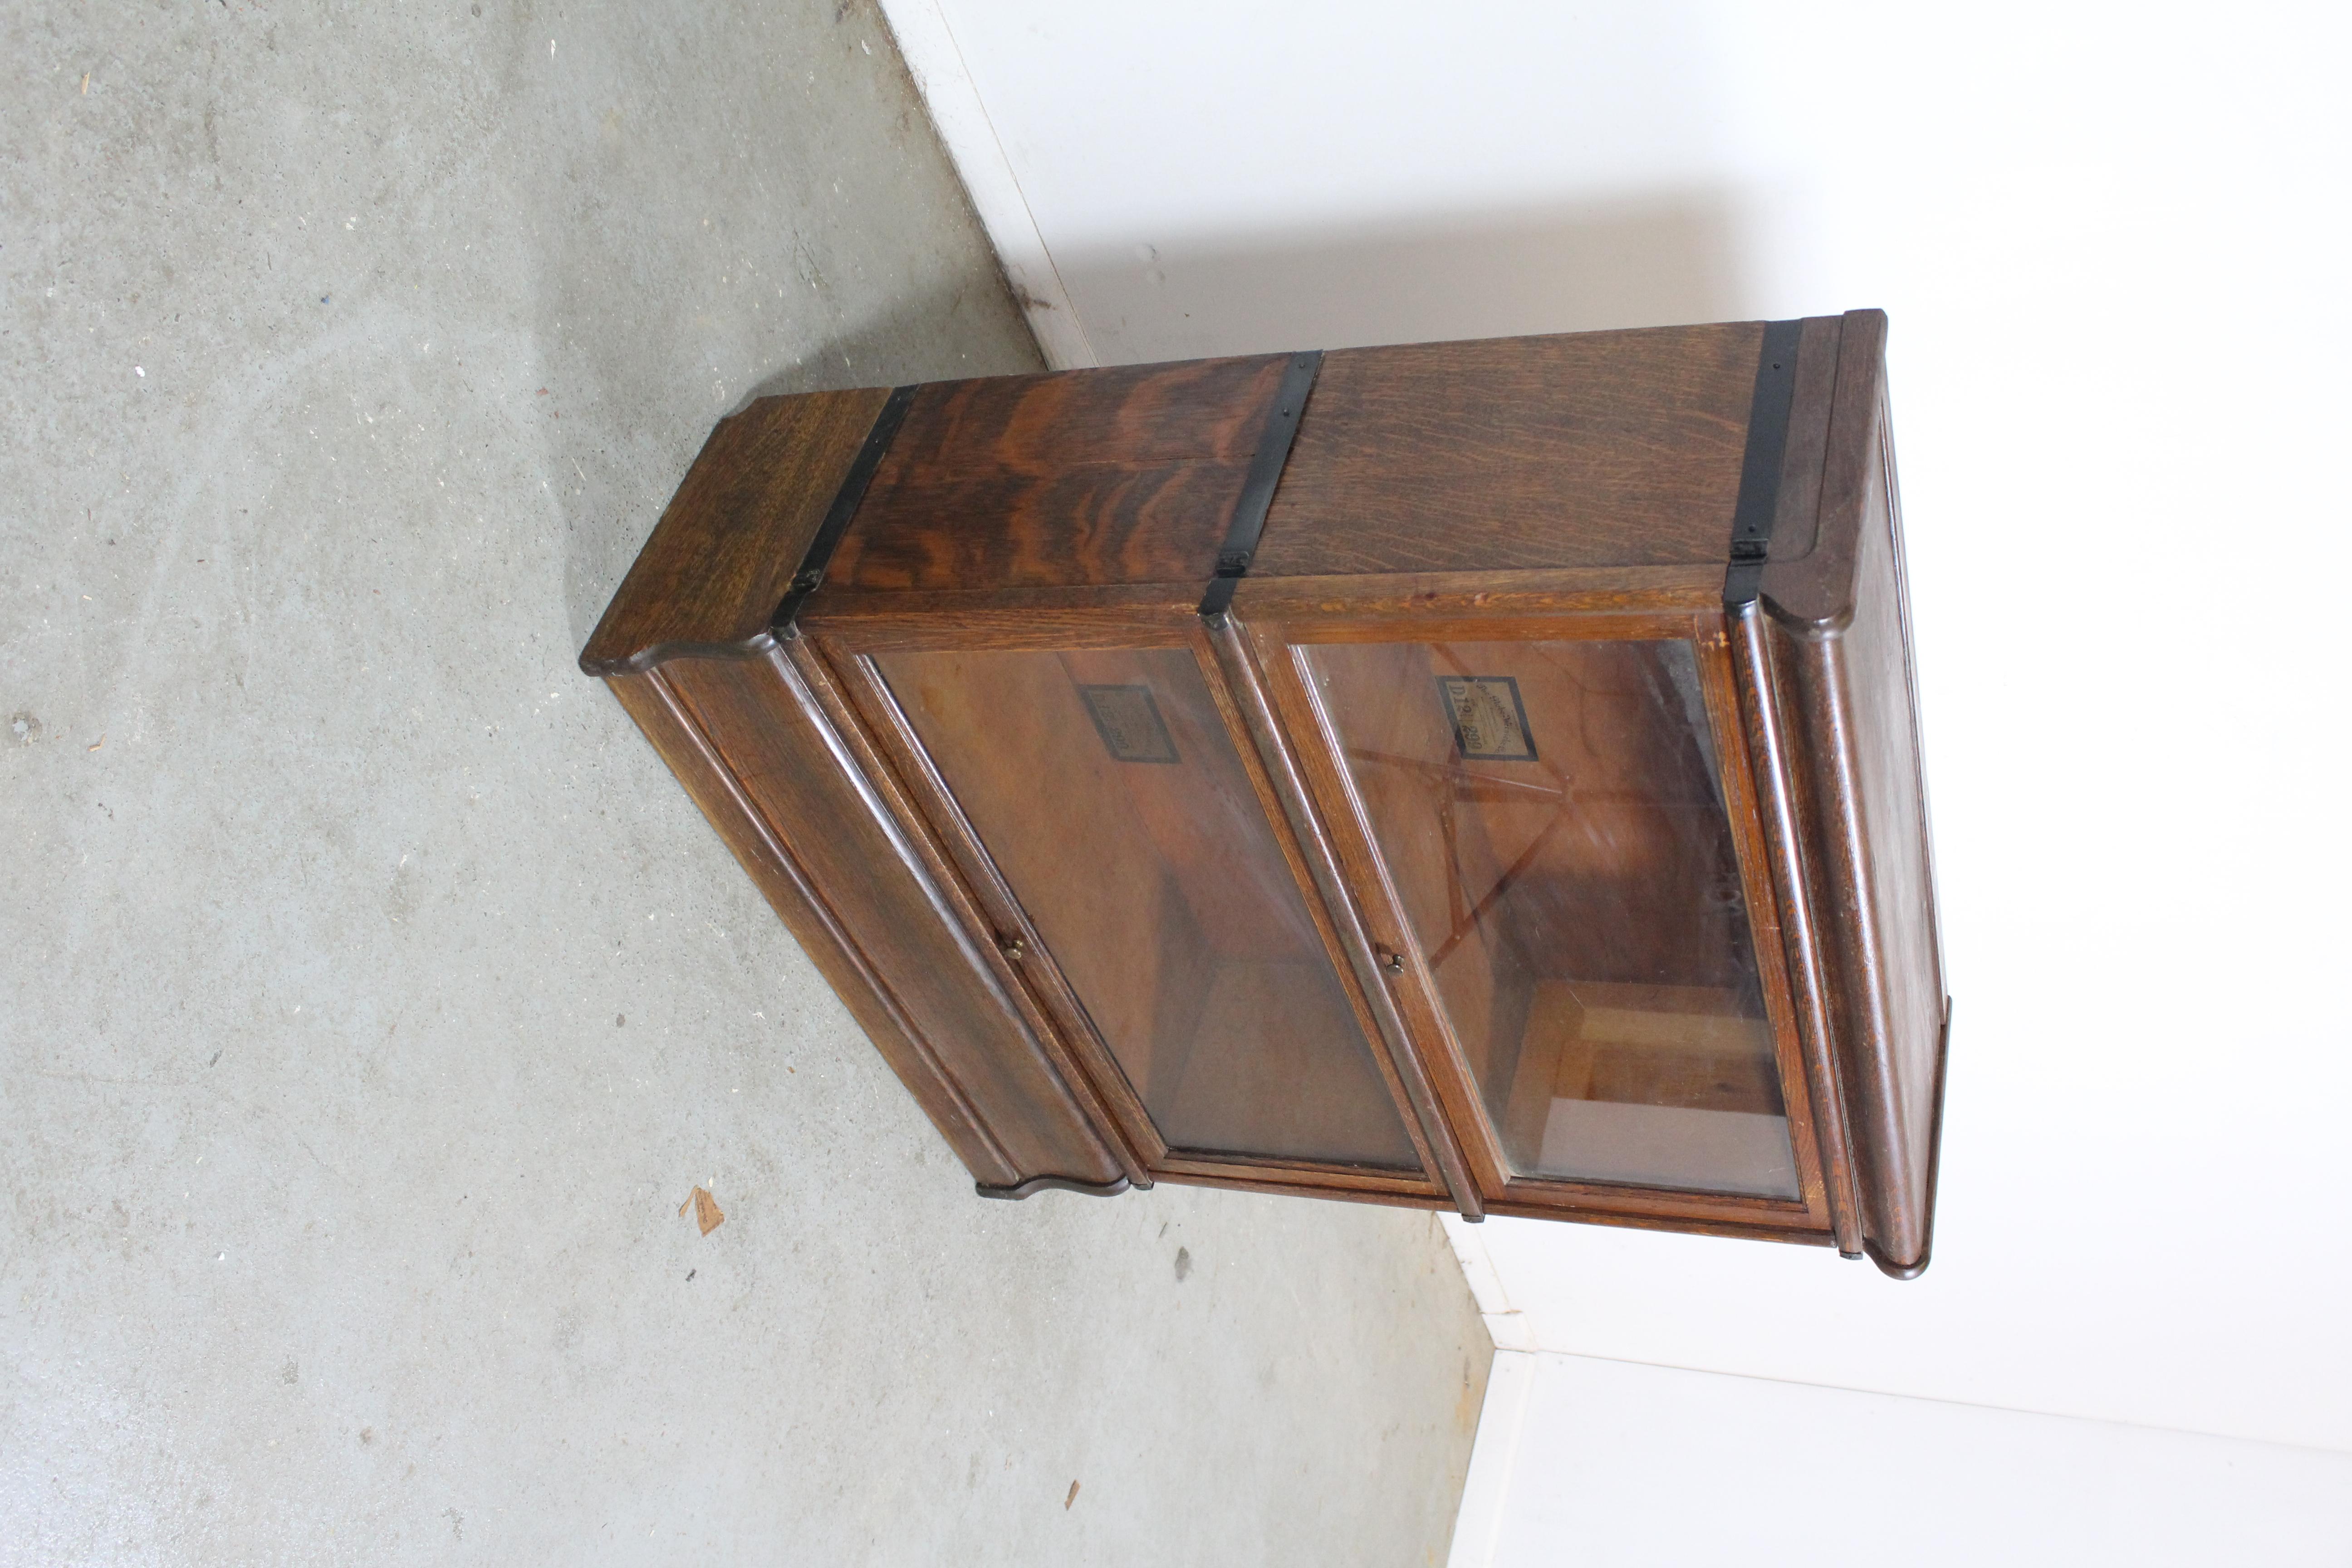 Vintage/antique Globe Wernicke oak 2 stack bookcase

Offered is a vintage two-piece oak bookcase. It can disassemble into the two pieces with a removable top and bottom. This piece is manufactured by Globe Wernicke. Each stack has a glass cover